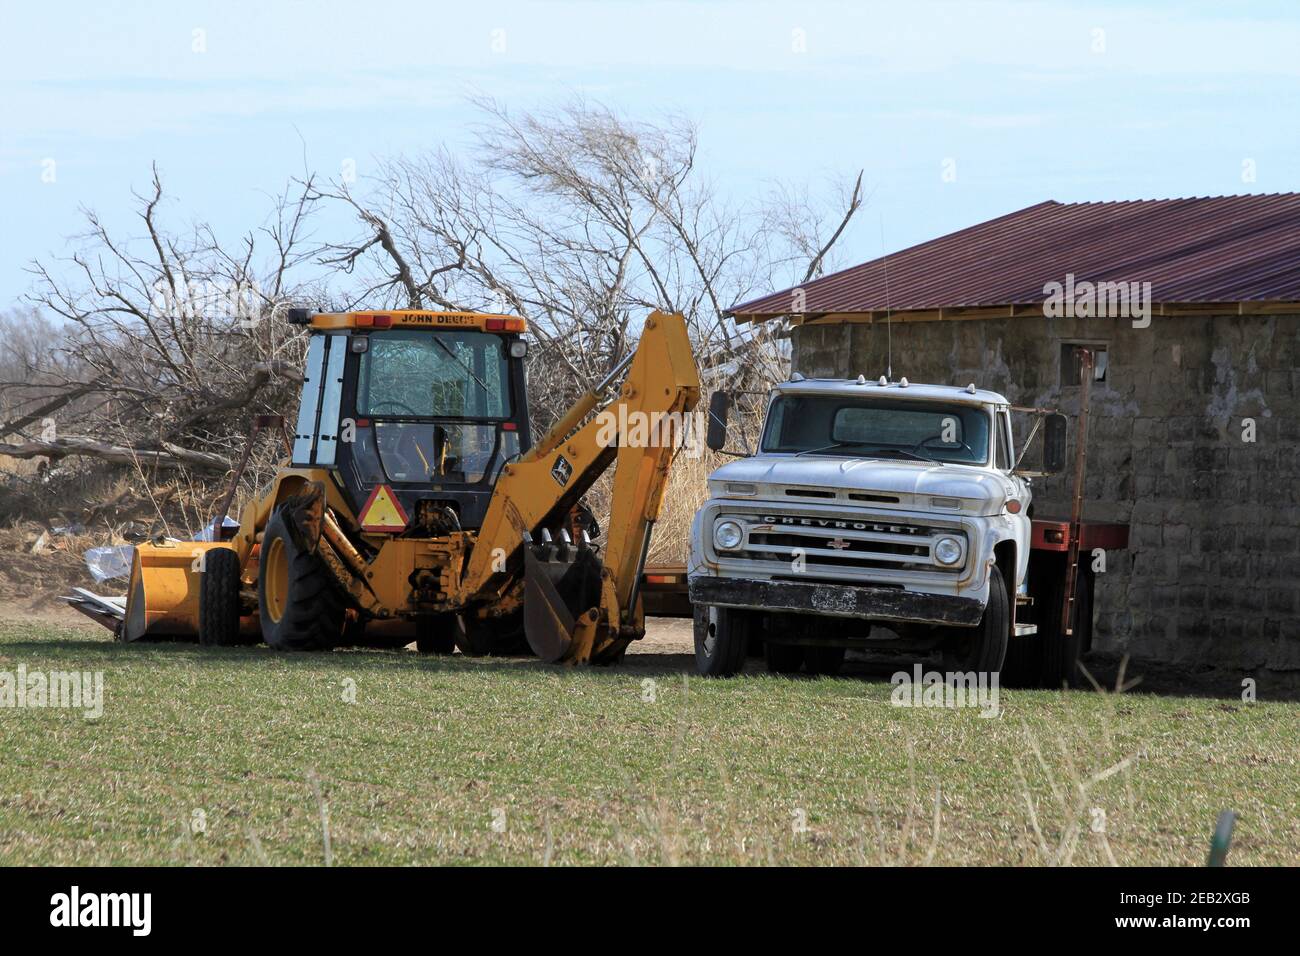 John Deere Tractor with a backhoe, front end loader, and a Chevrolet flat bed Truck ready for work out ion the country. Stock Photo